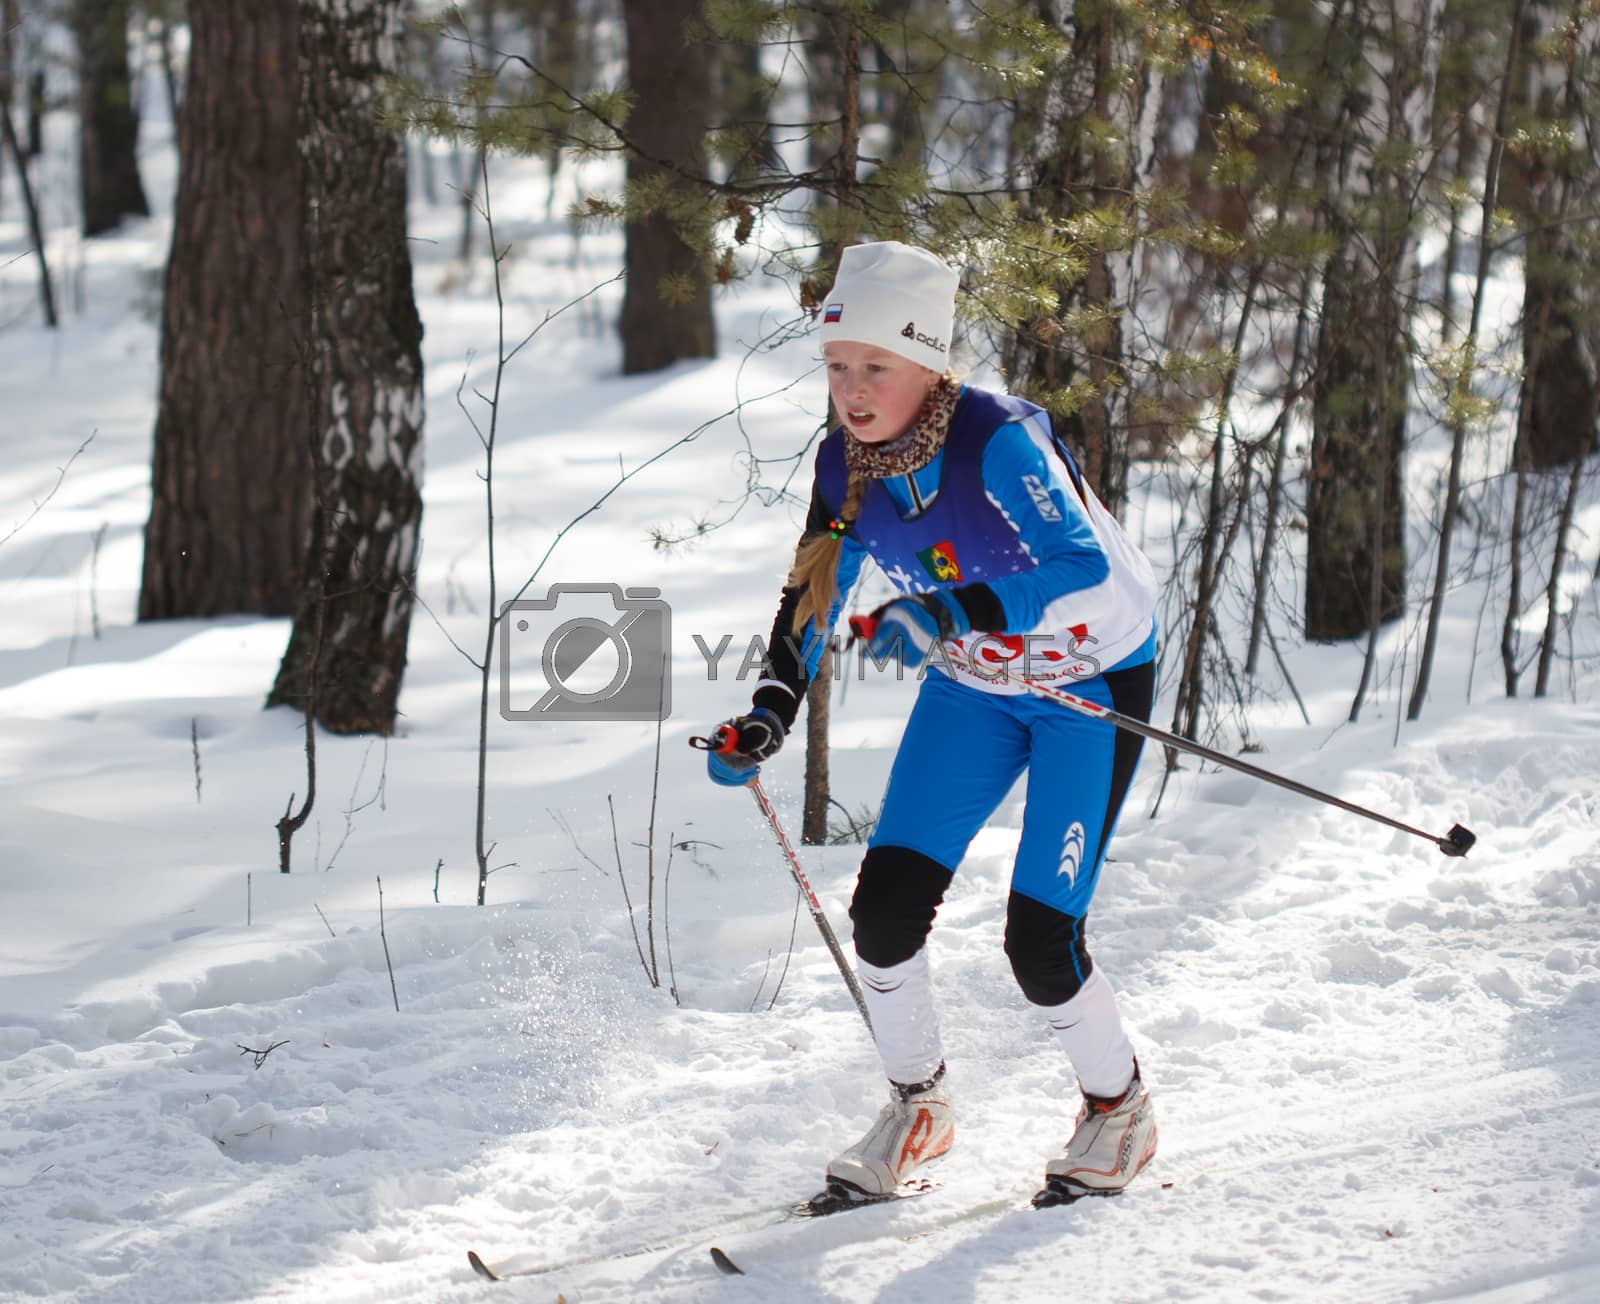 Royalty free image of Cross-country skis by Supertooper